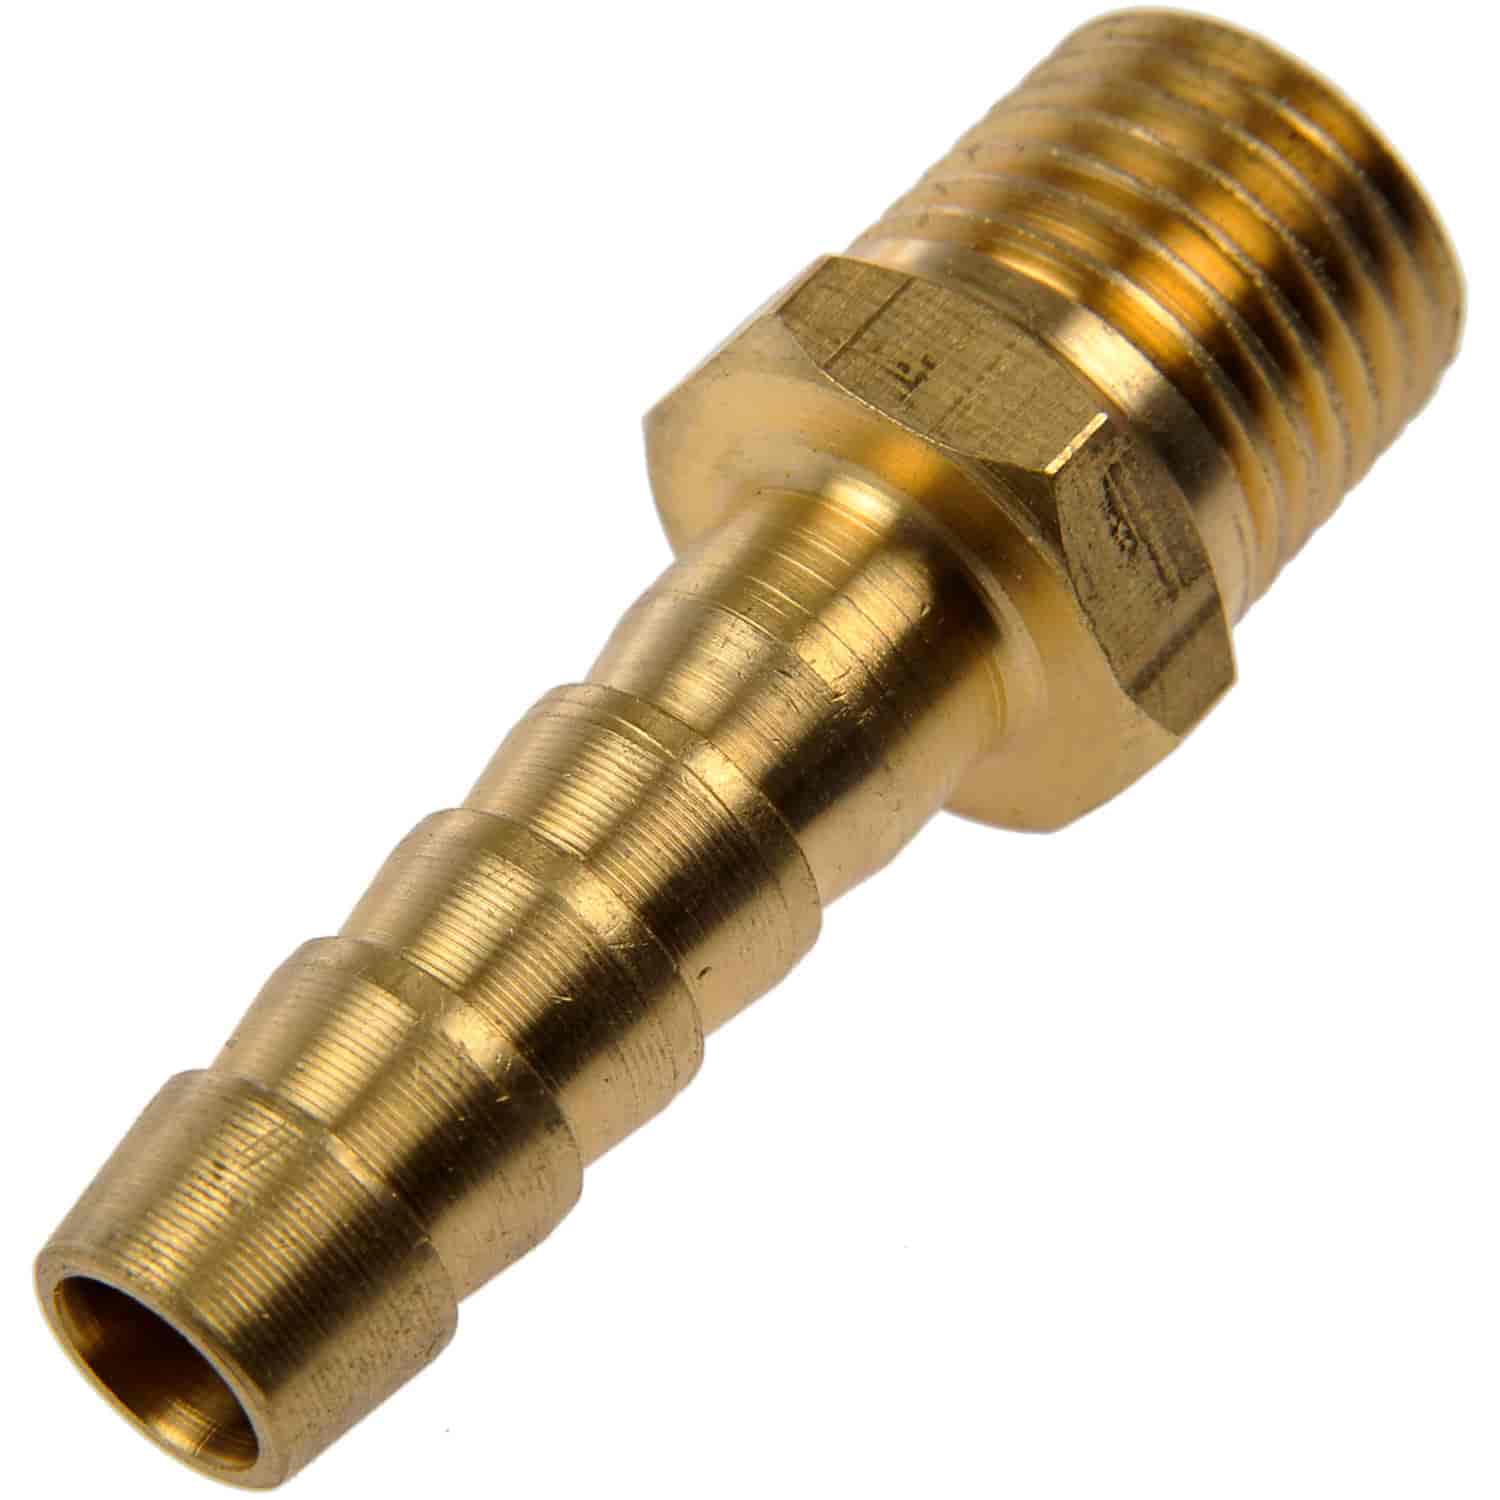 Fuel Hose Fitting-Male Connector-5/16 In. x 1/4 In.